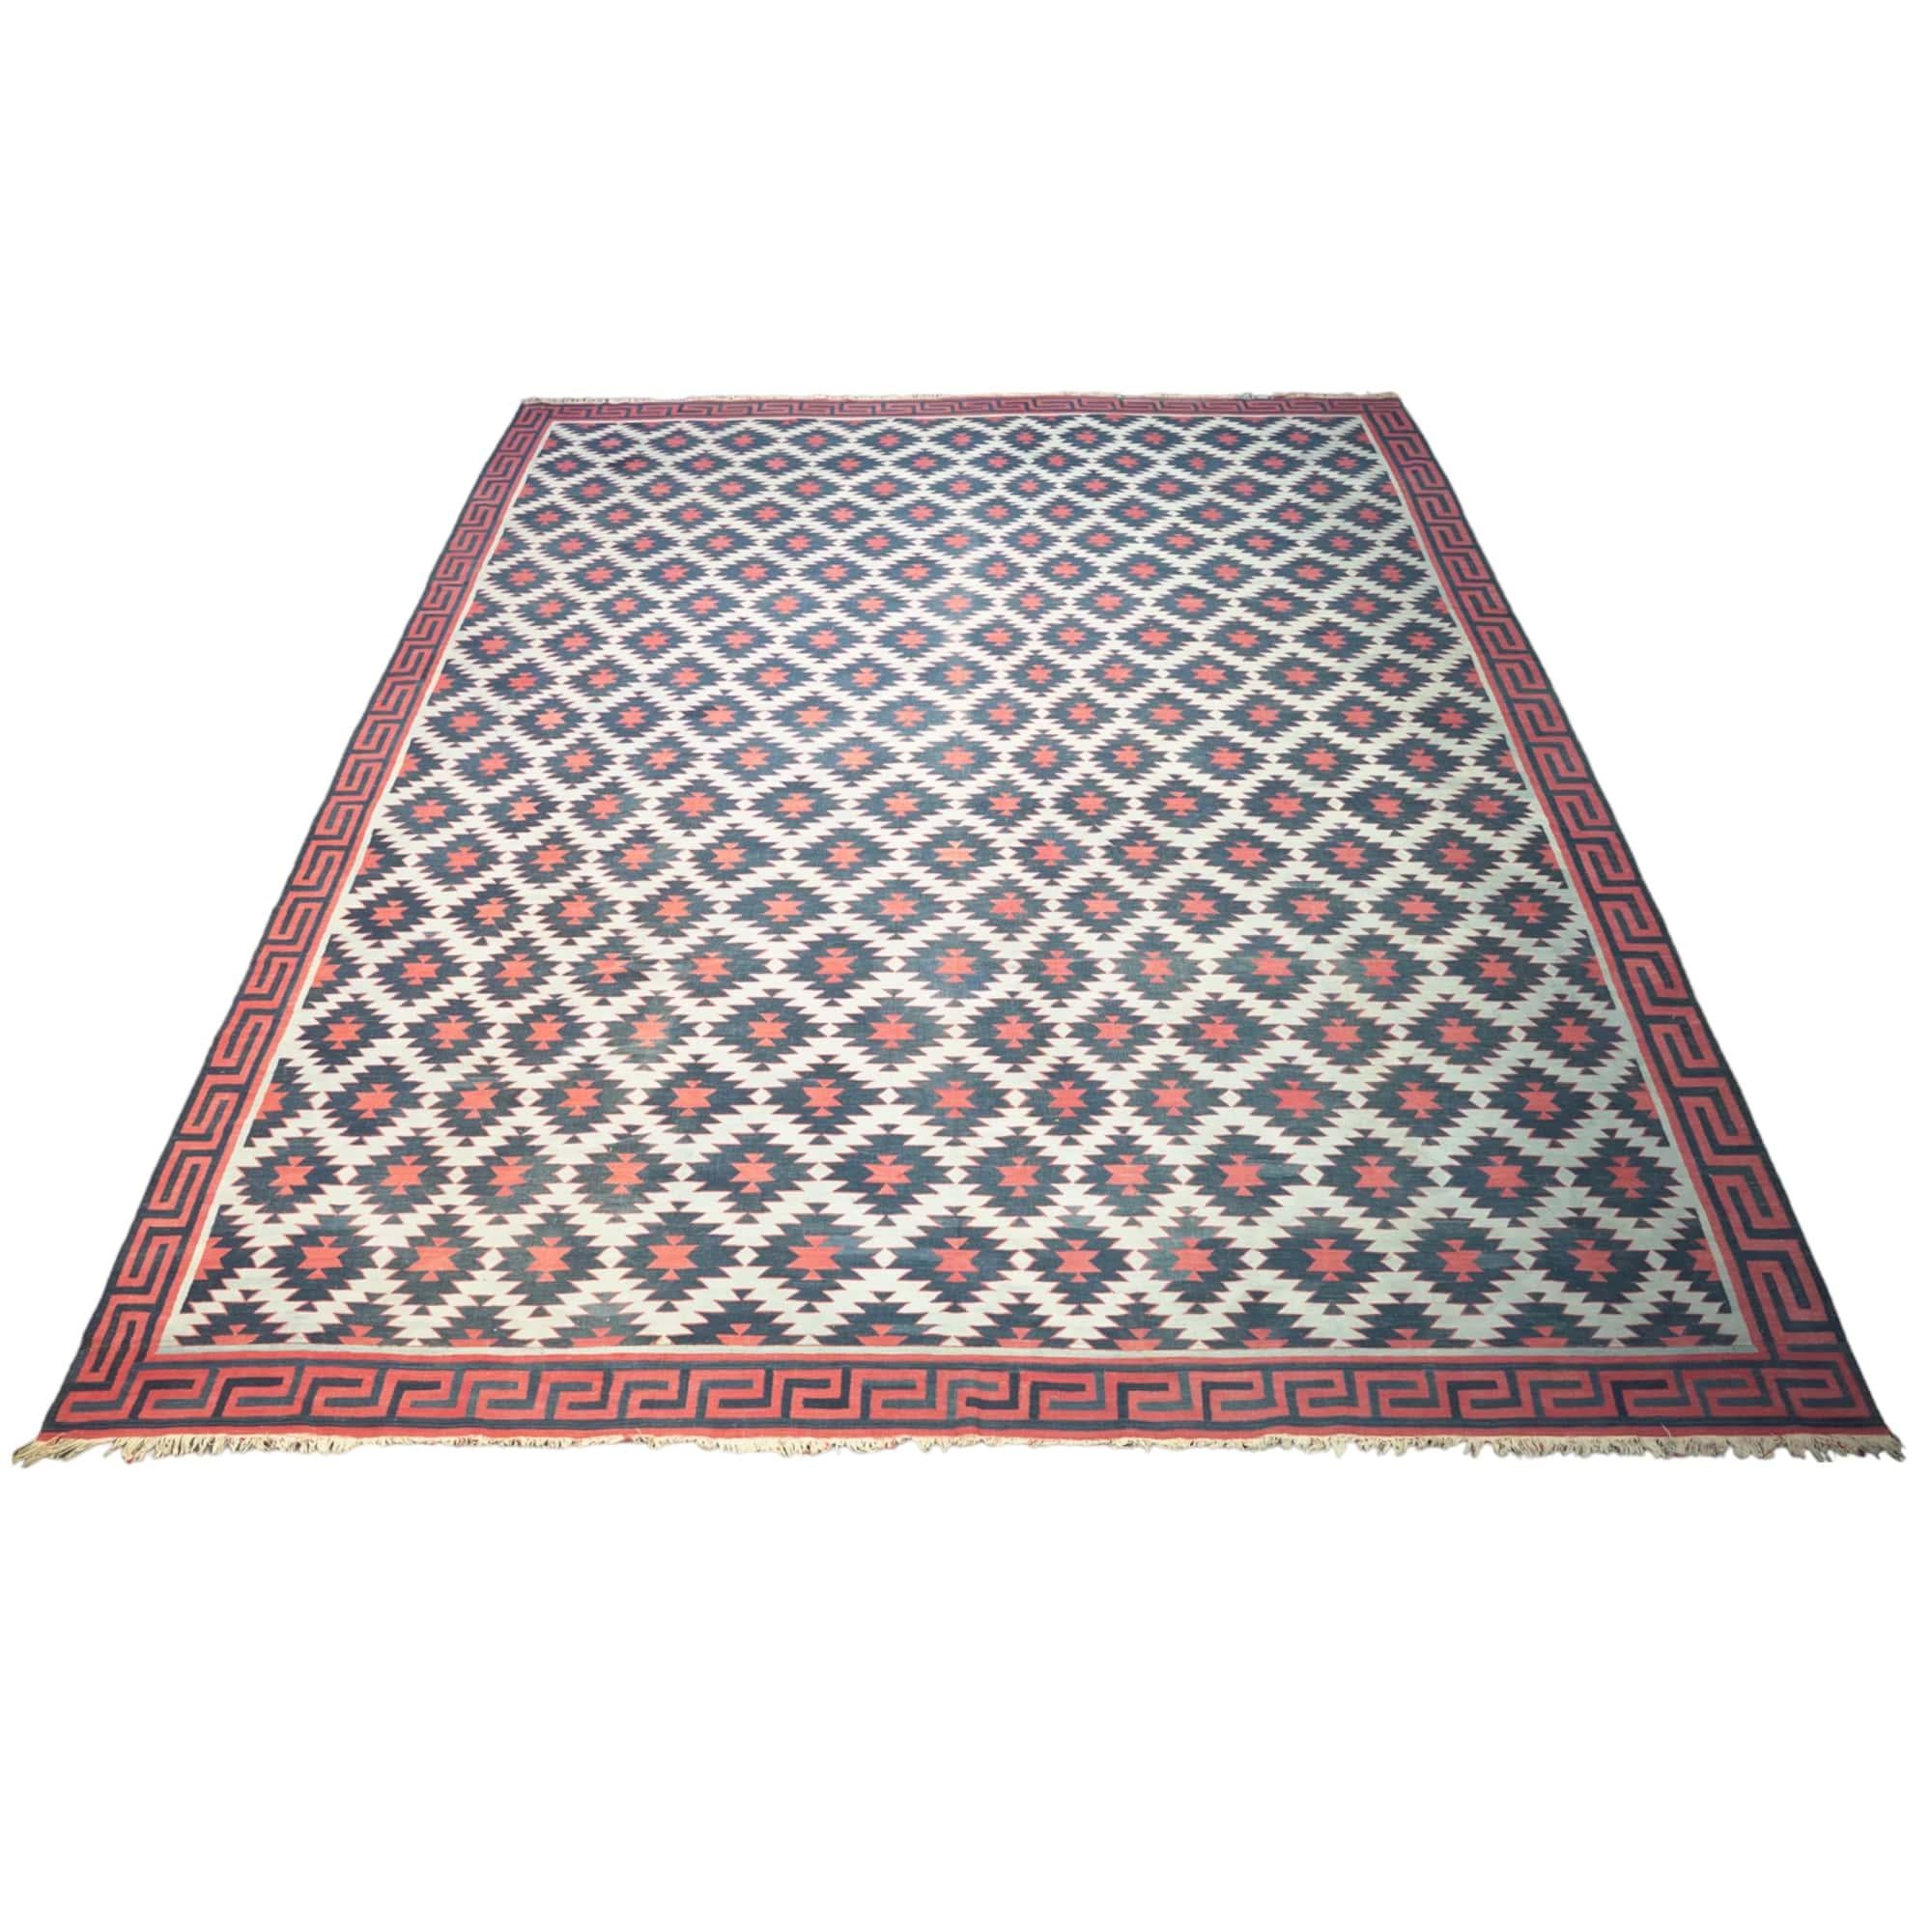 This vintage 11x14 Dhurrie flat weave is an exciting new entry in Rug & Kilim’s esteemed collection. Handwoven in wool, it originates from India circa 1950-1960. 

On the Design: 

From Rug & Kilim’s exclusive collection of vintage flatweaves, a